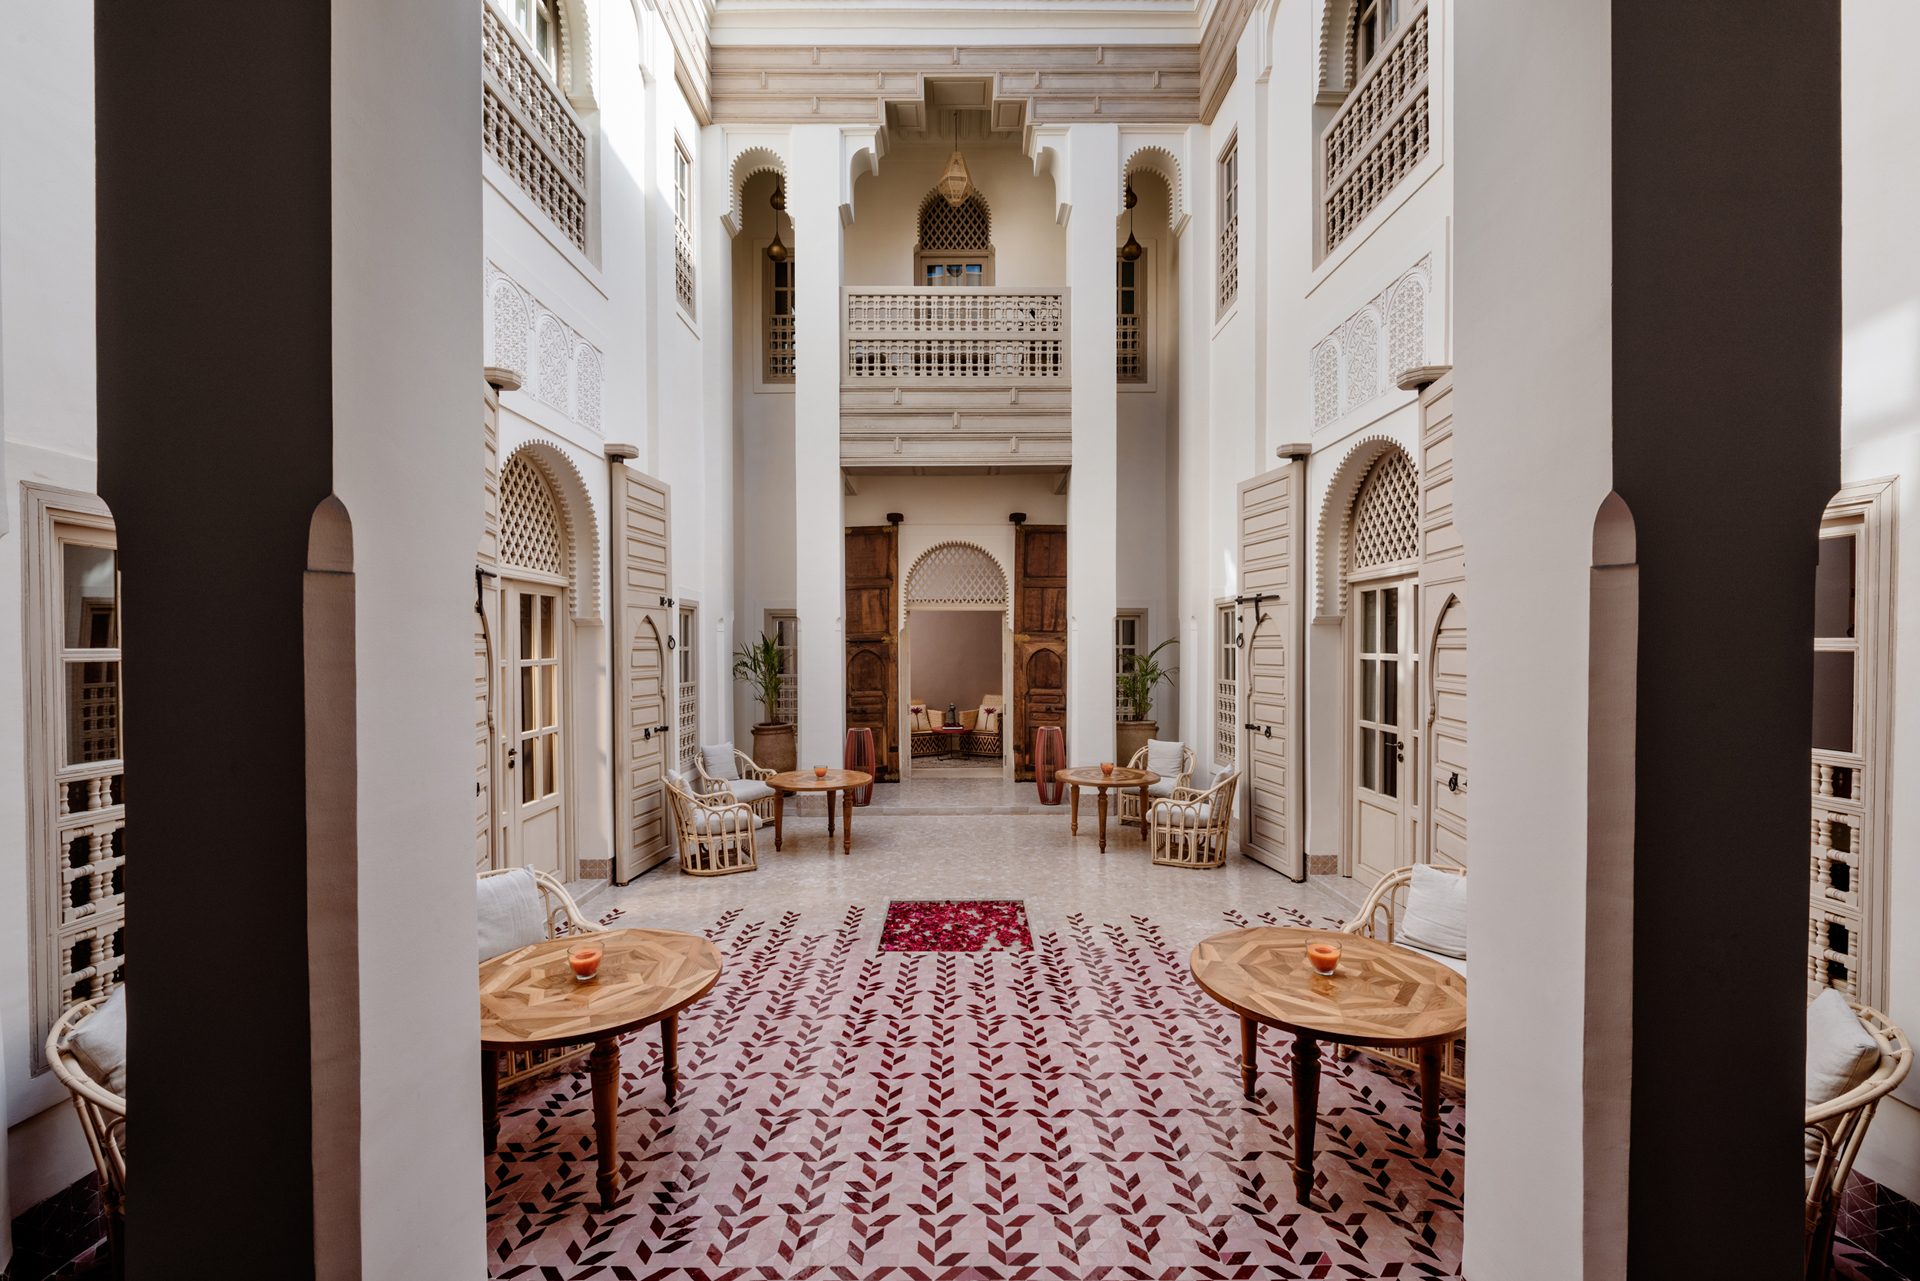 Those typical Moroccan Riads - Riad Living